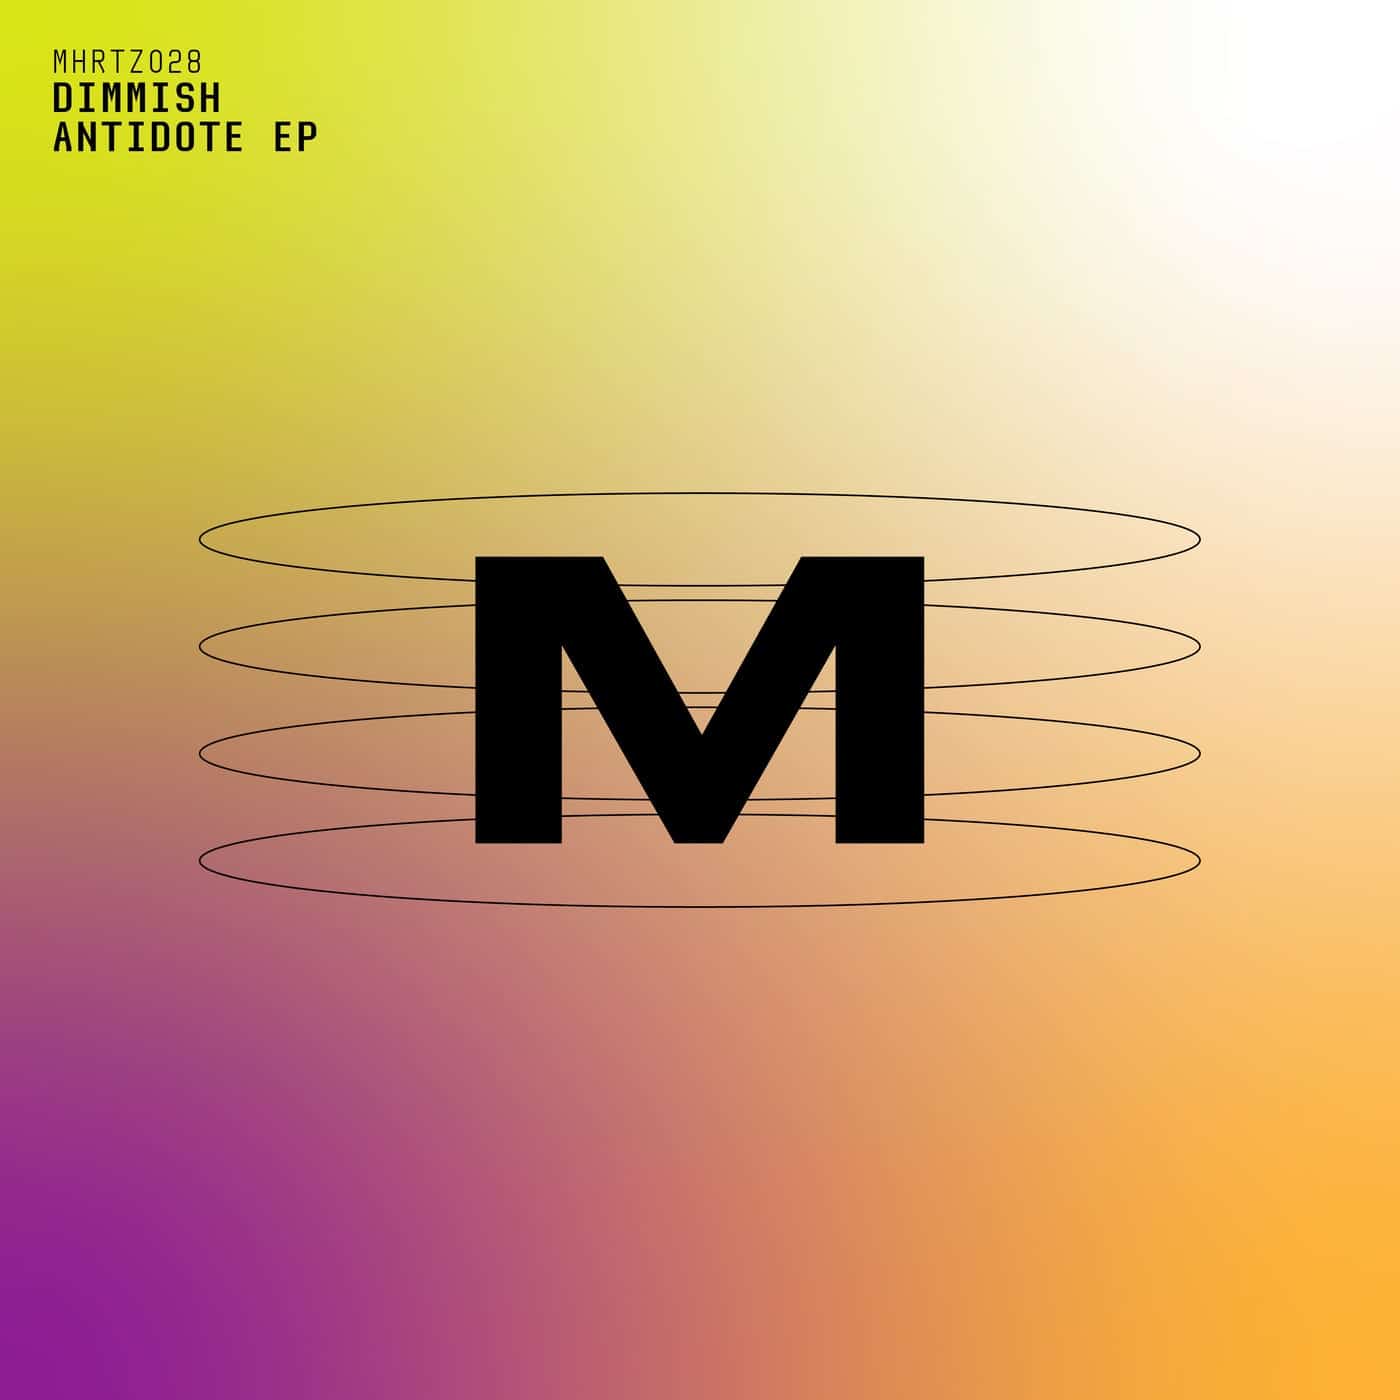 image cover: Antidote EP by DIMMISH on MicroHertz